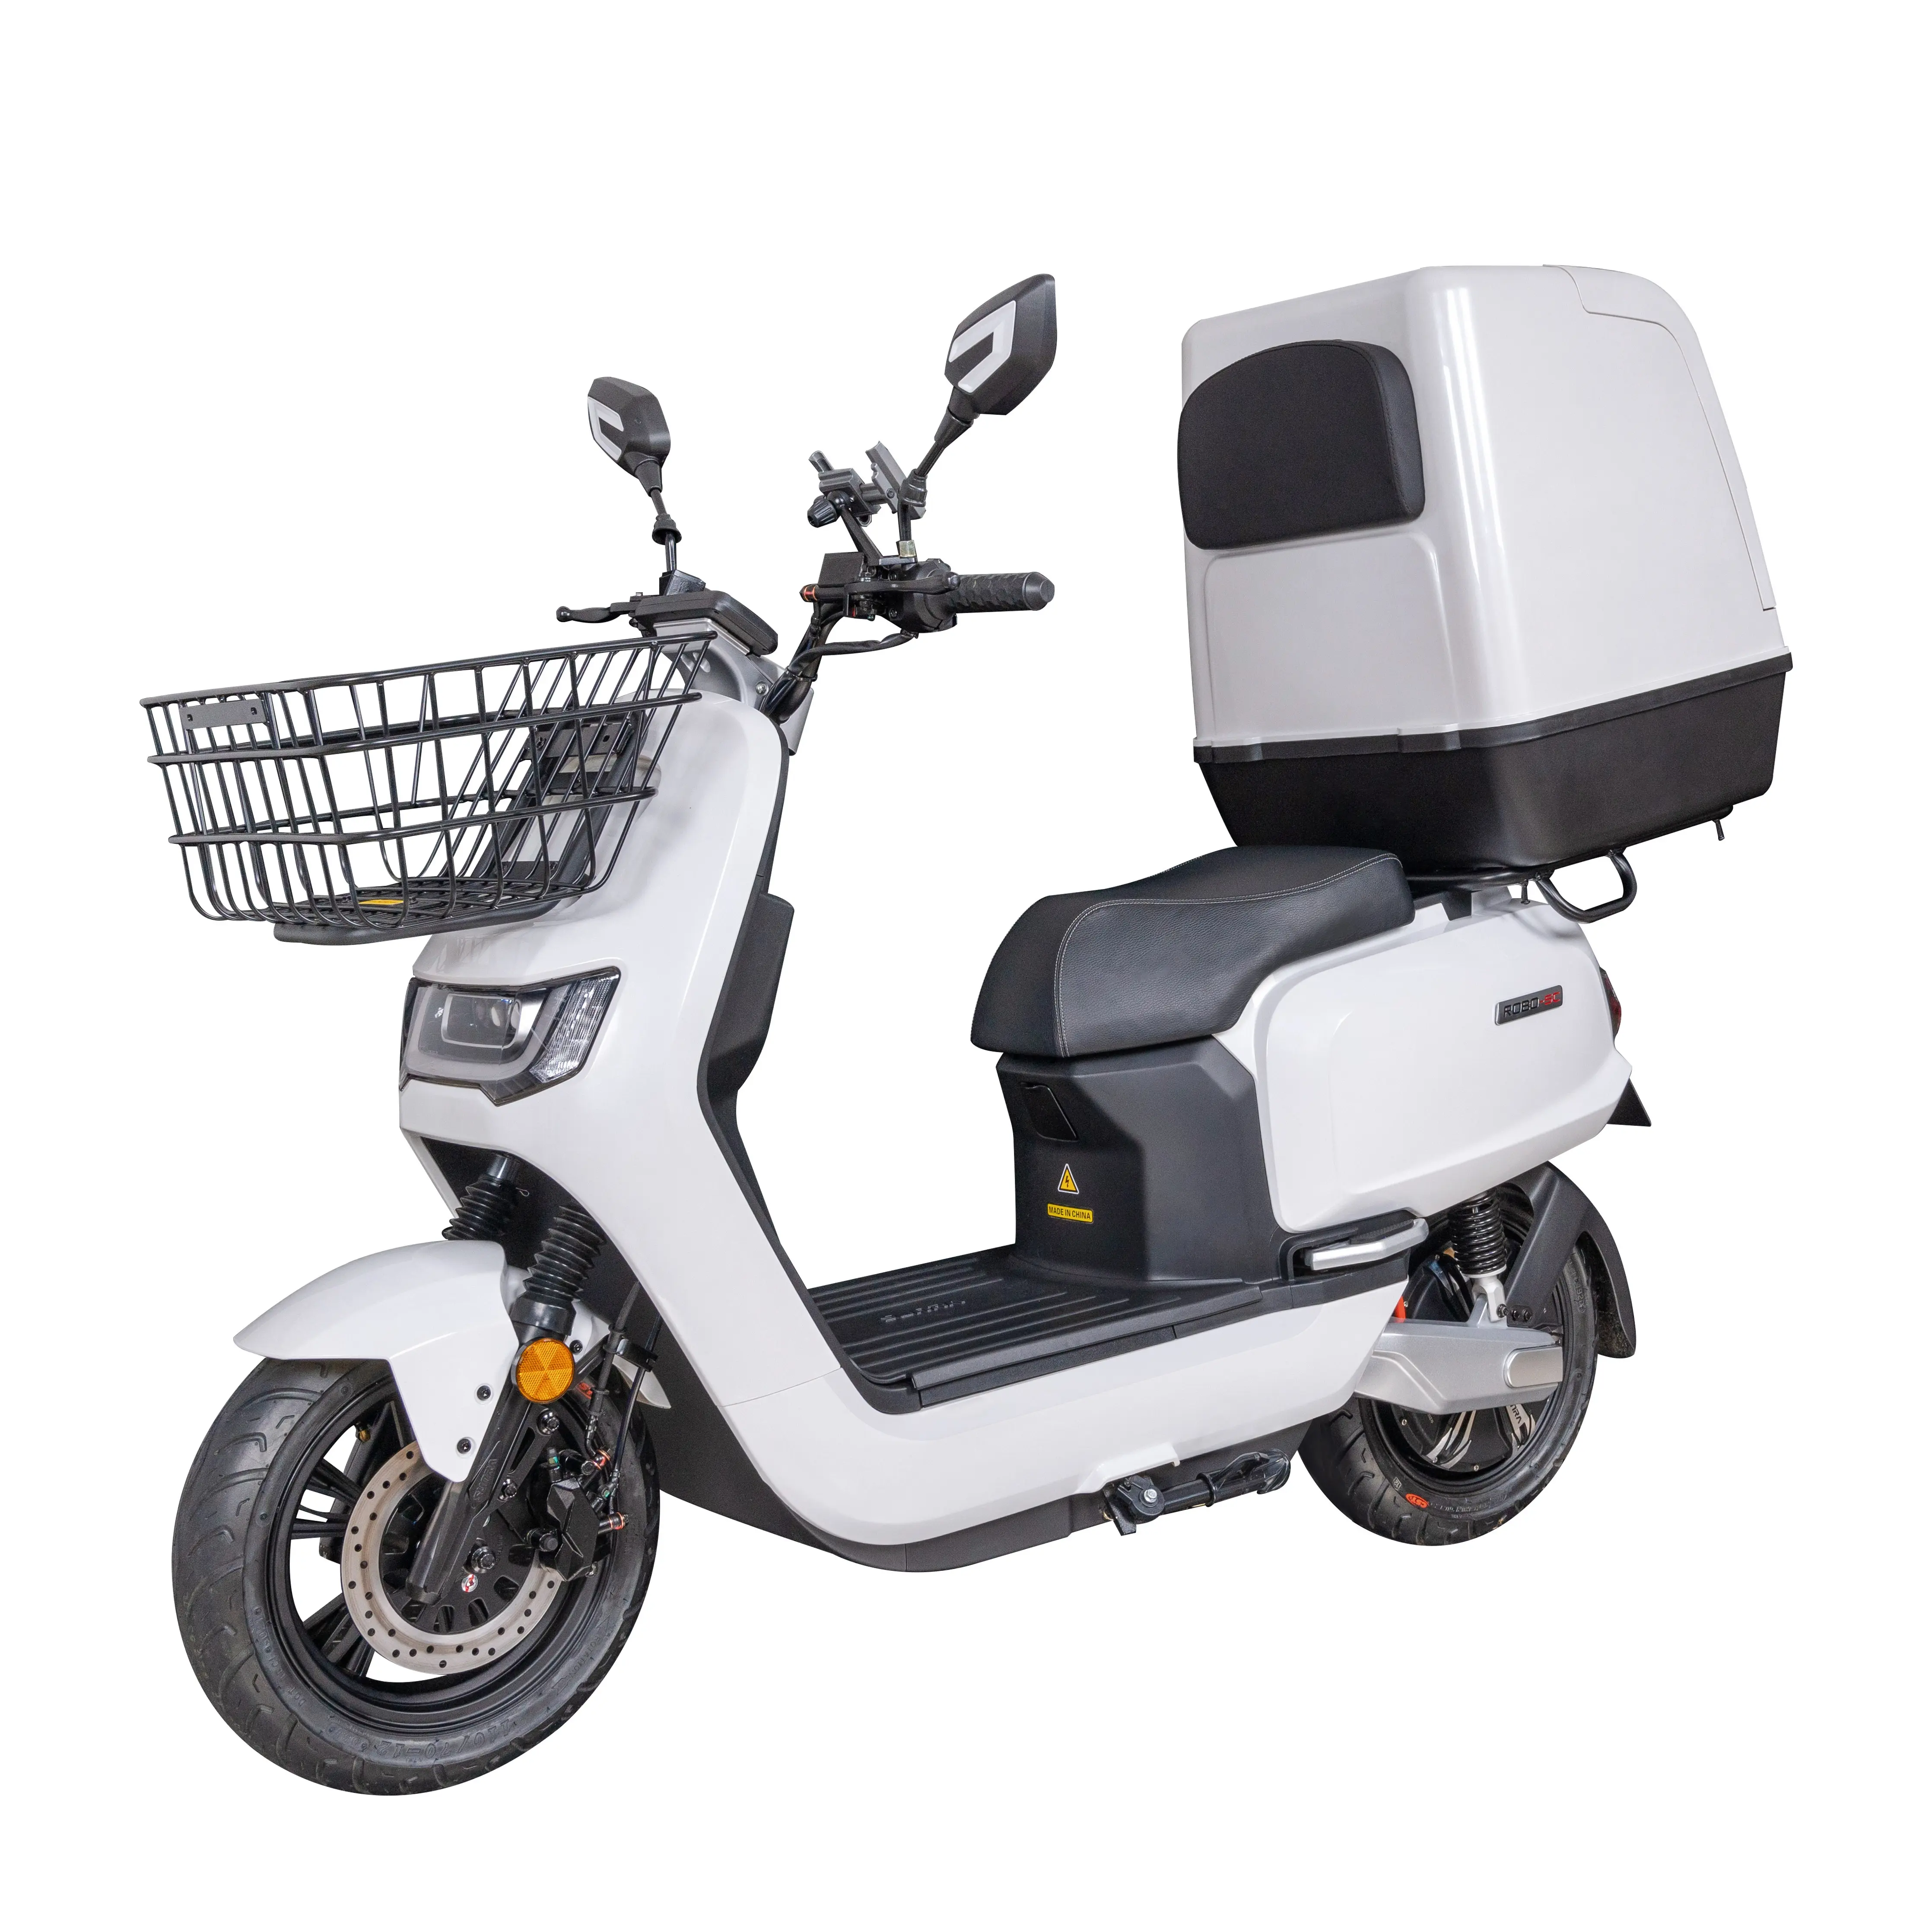 Electric motorcycle 2 wheel electric car 72V dual lithium battery electric scooter adult 3000W high power moped takeaway version